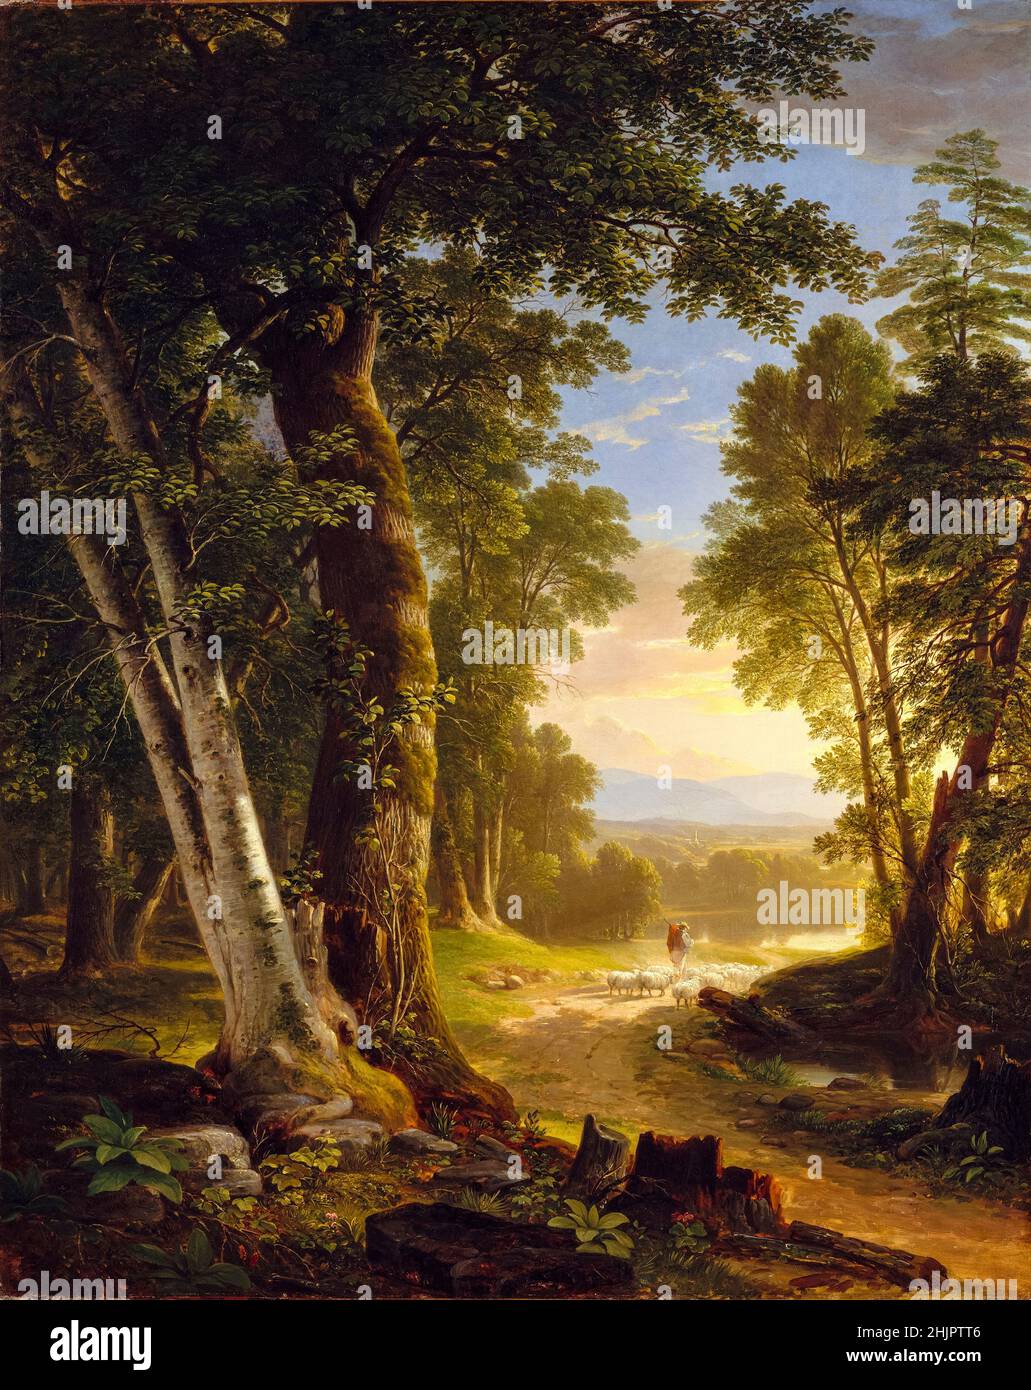 Asher Brown Durand, The Beeches, landscape painting, 1845 Stock Photo